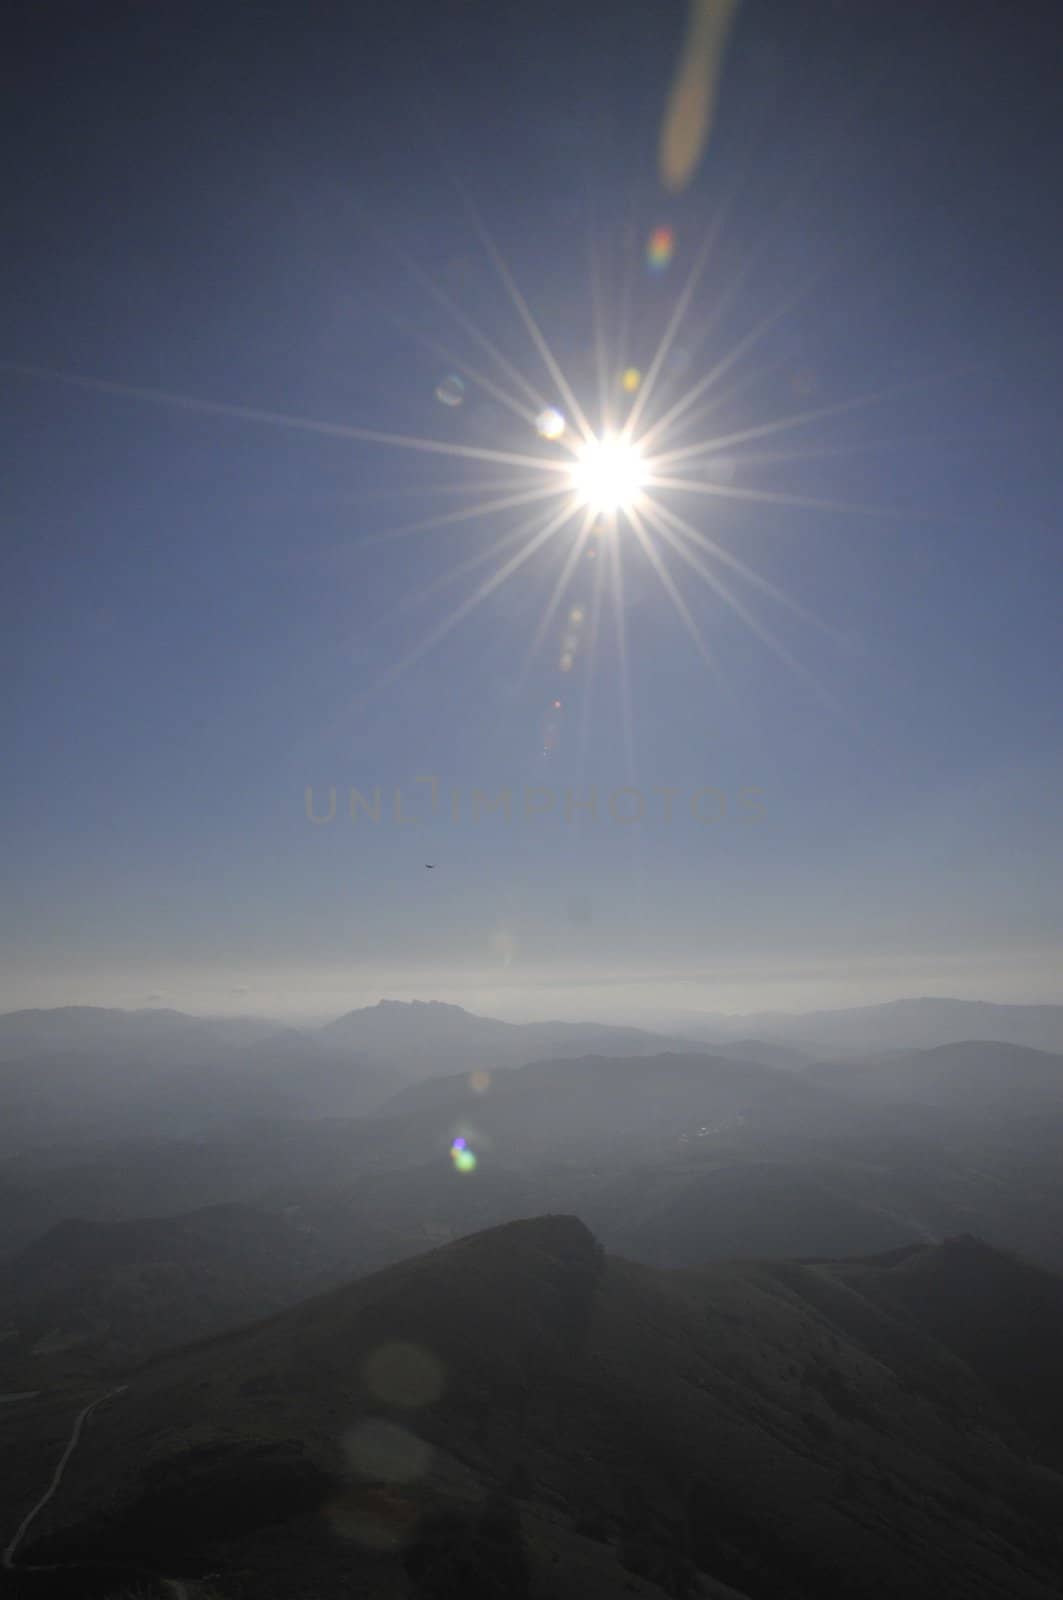 Hard sun with rays above french Pyrenees mountains